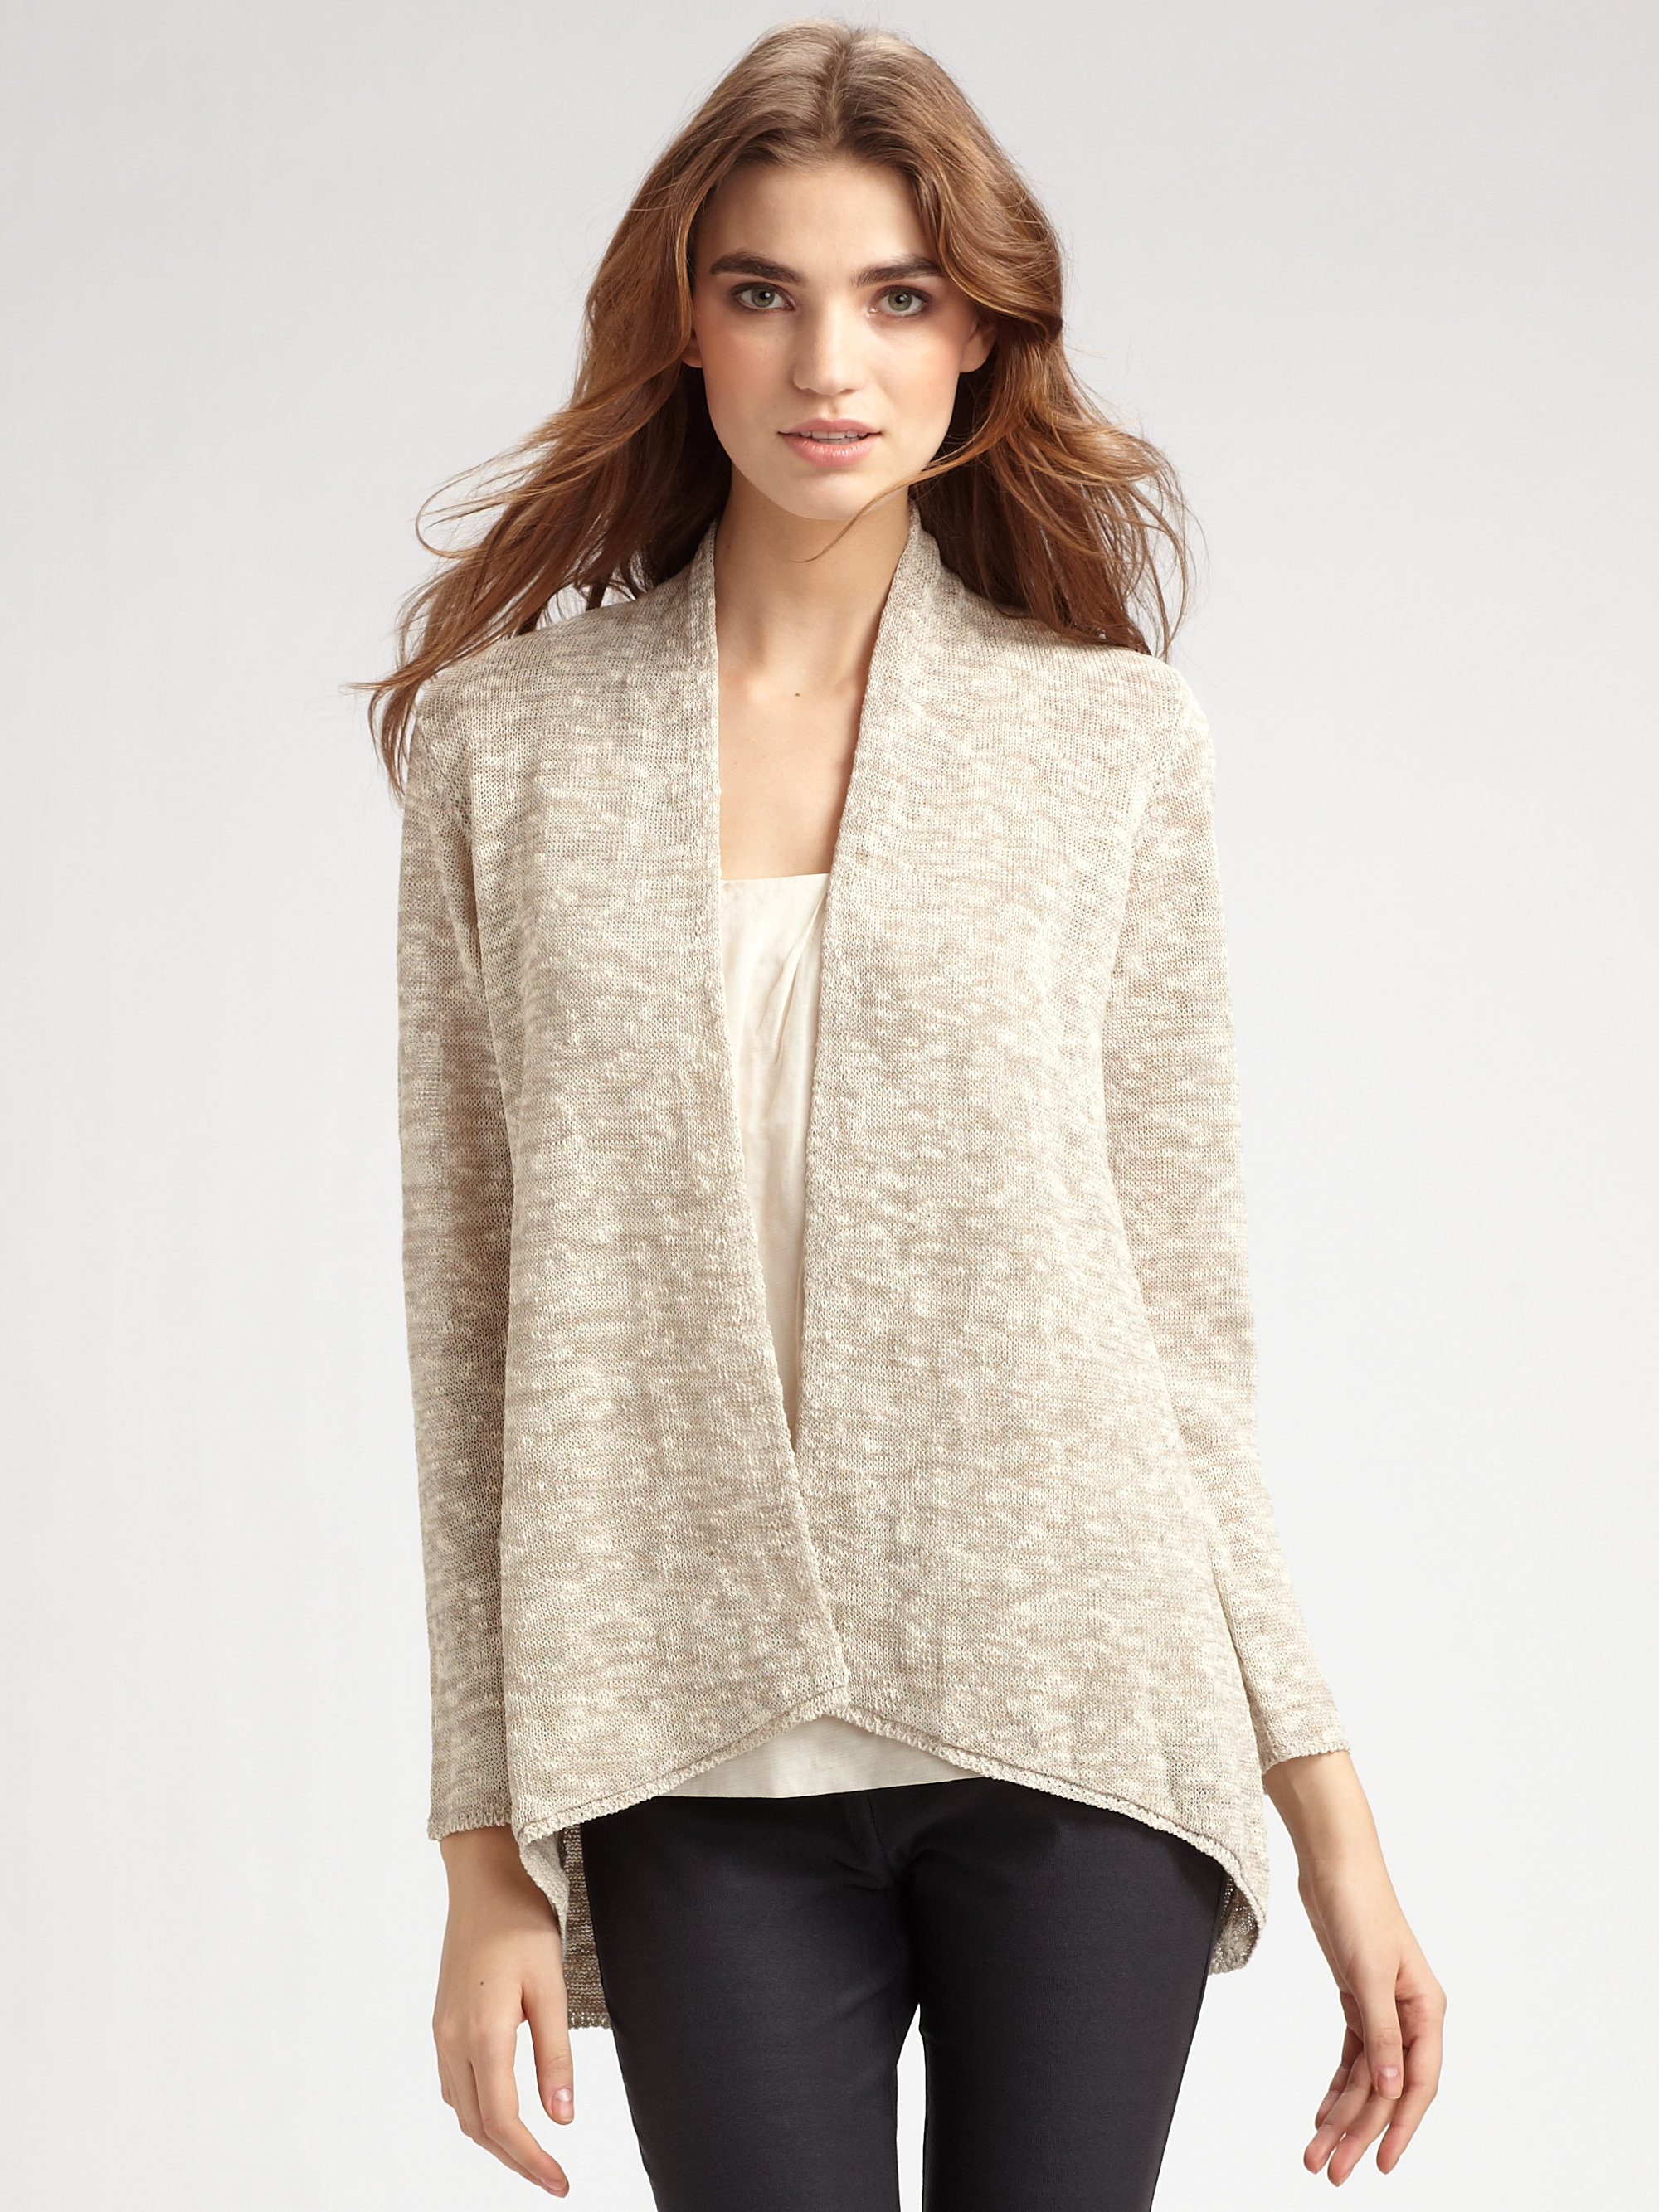 Eileen Fisher Heathered Asymmetrical Cardigan in Natural - Lyst